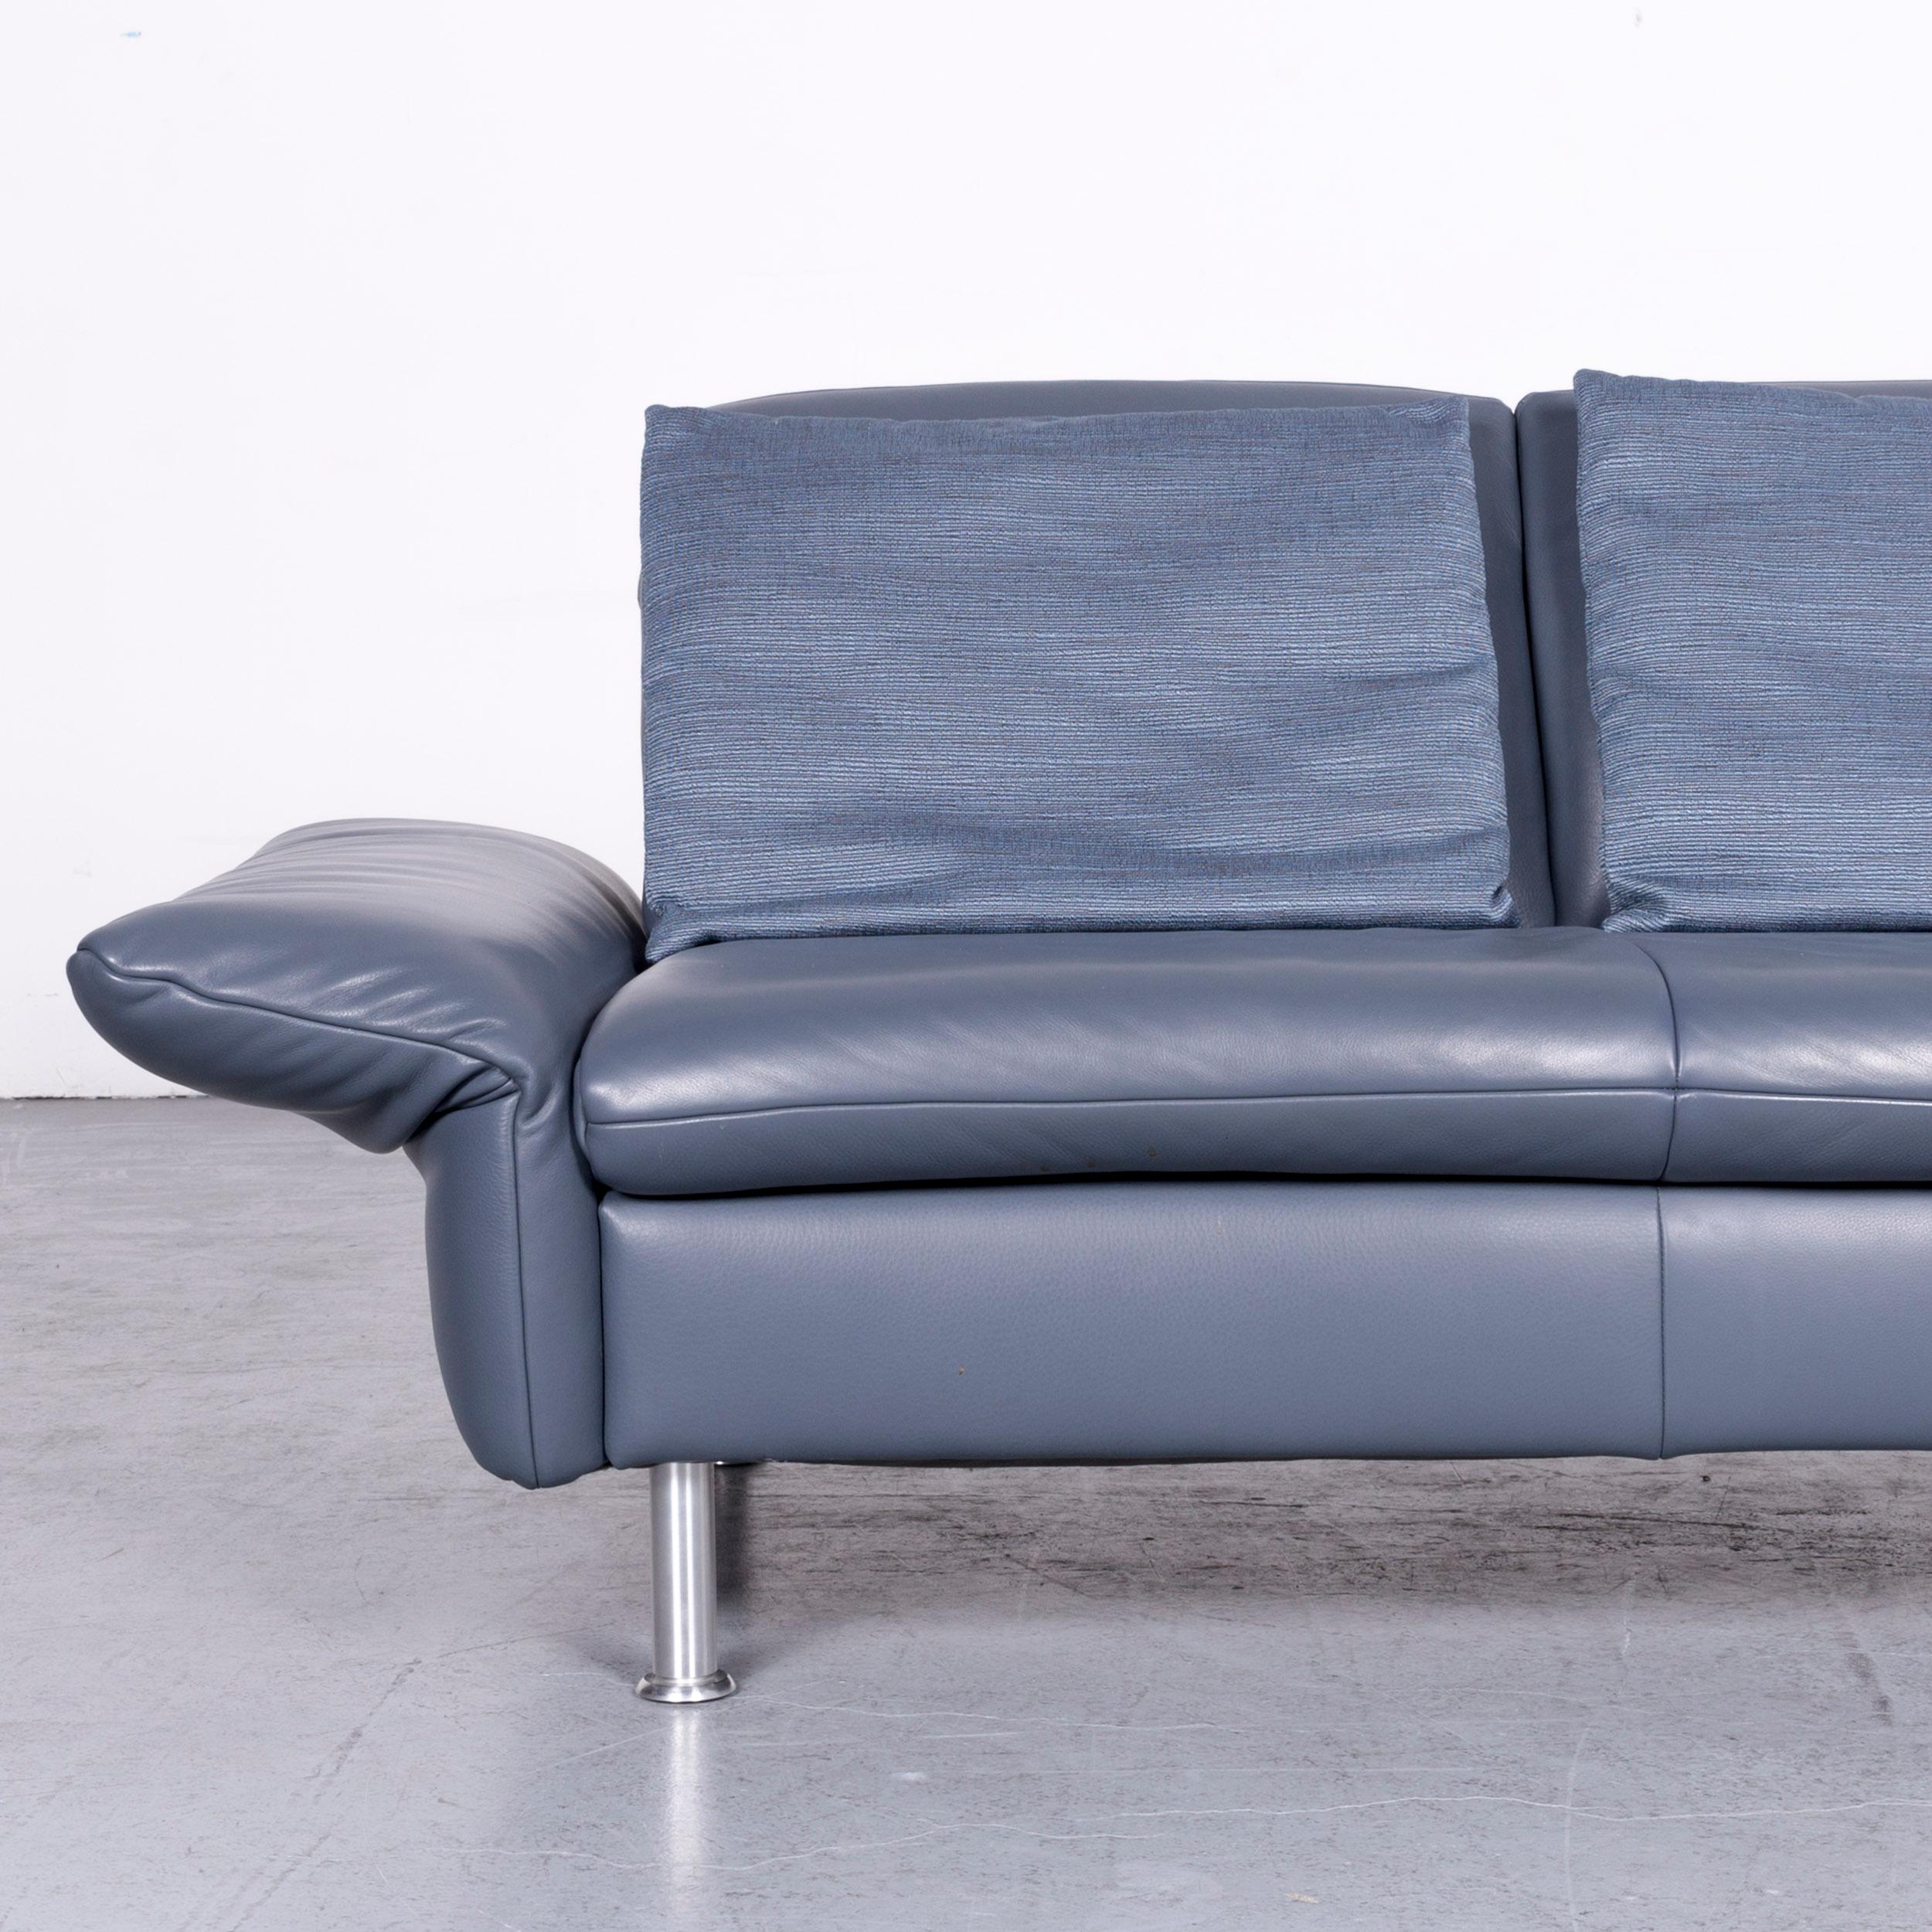 Koinor Designer Two-Seat Sofa Blue Leather Couch 1